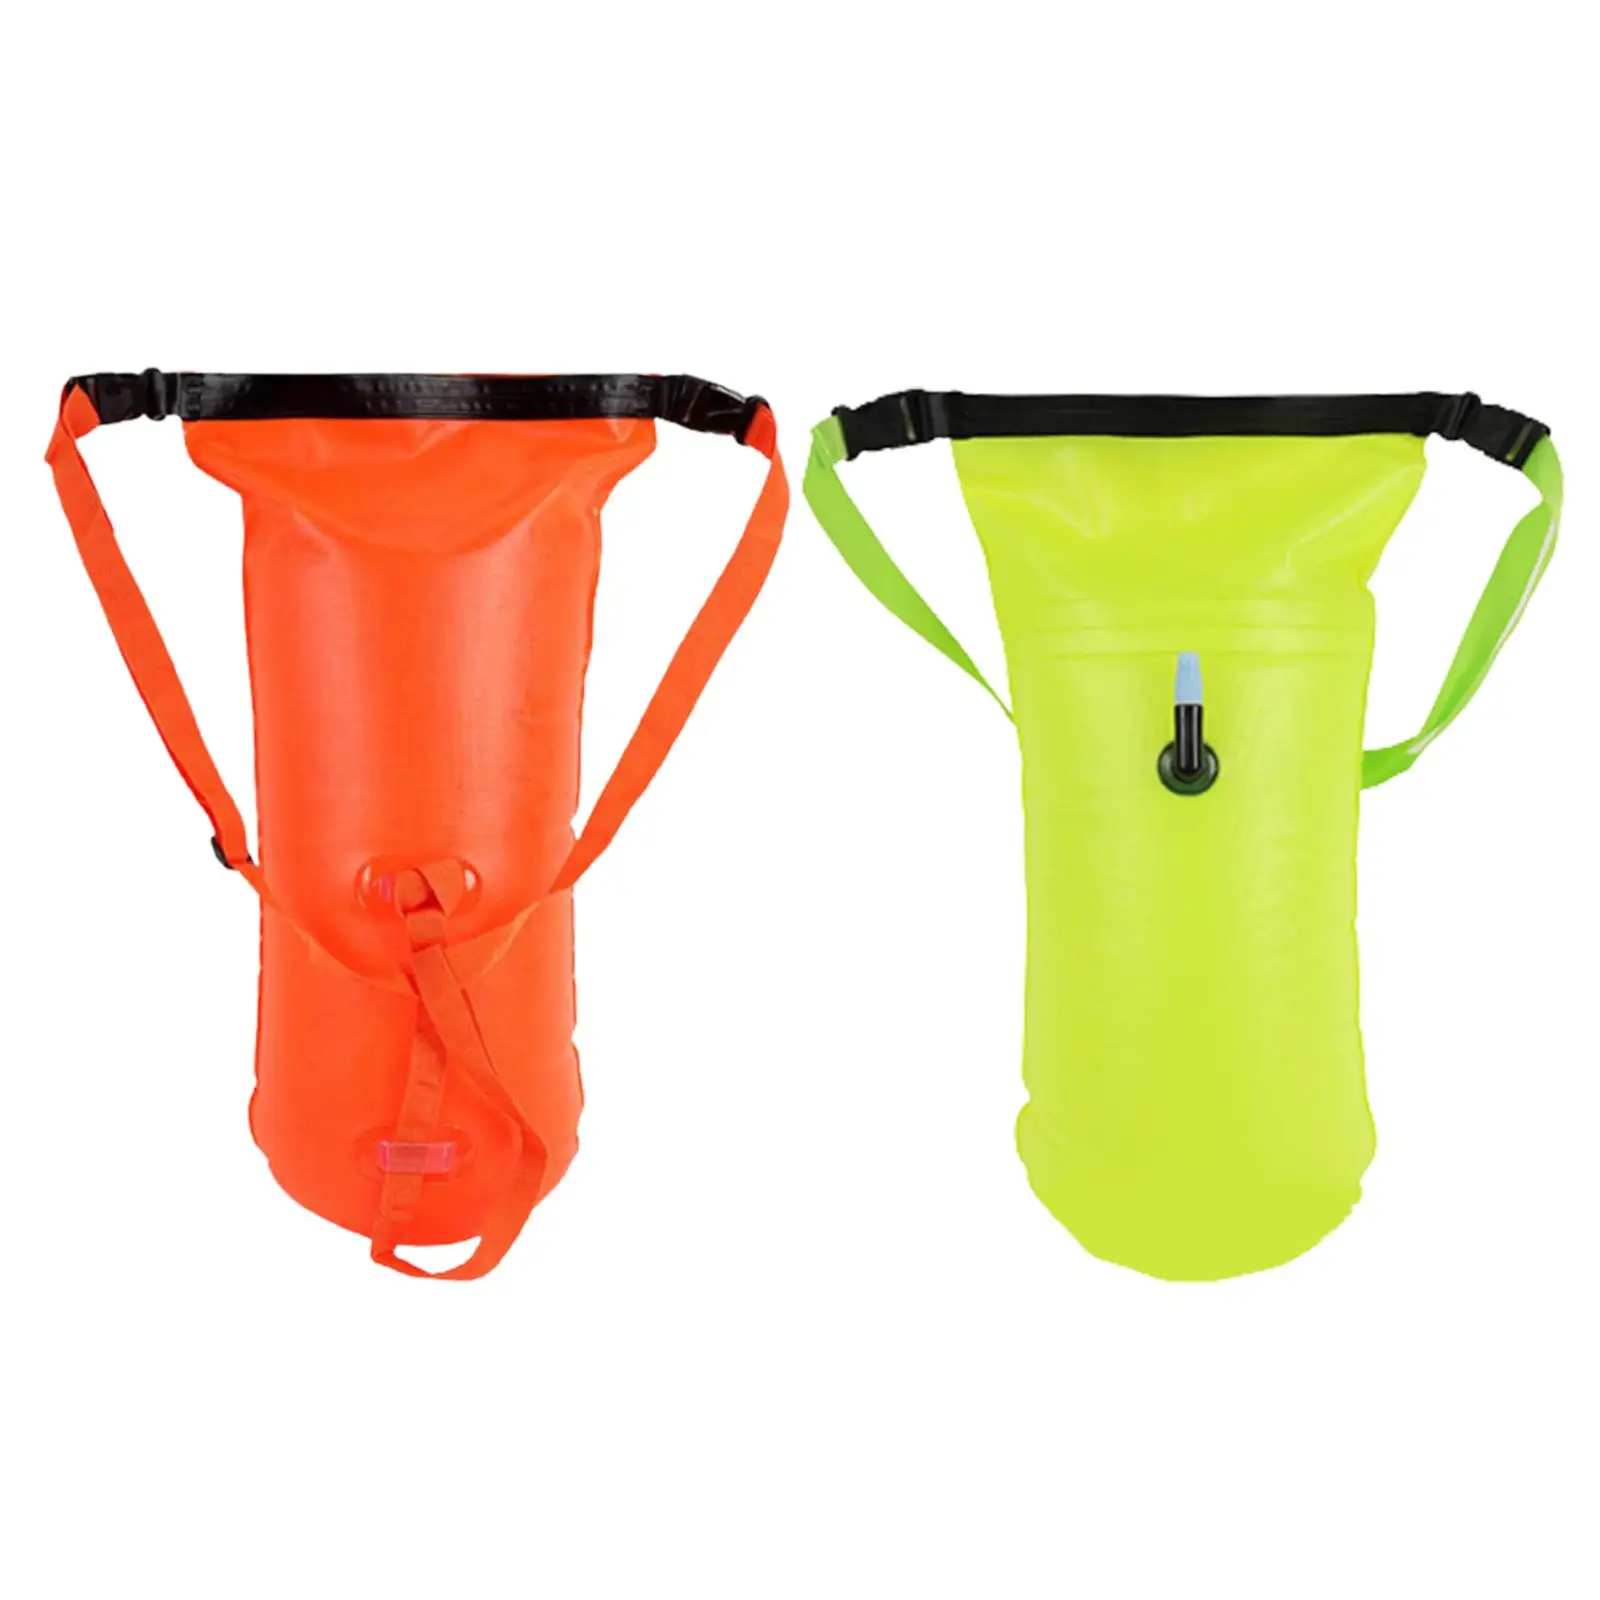 Inflatable Swim Buoy Safety Float Waterproof Air Dry Bag for Hiking Kayaking